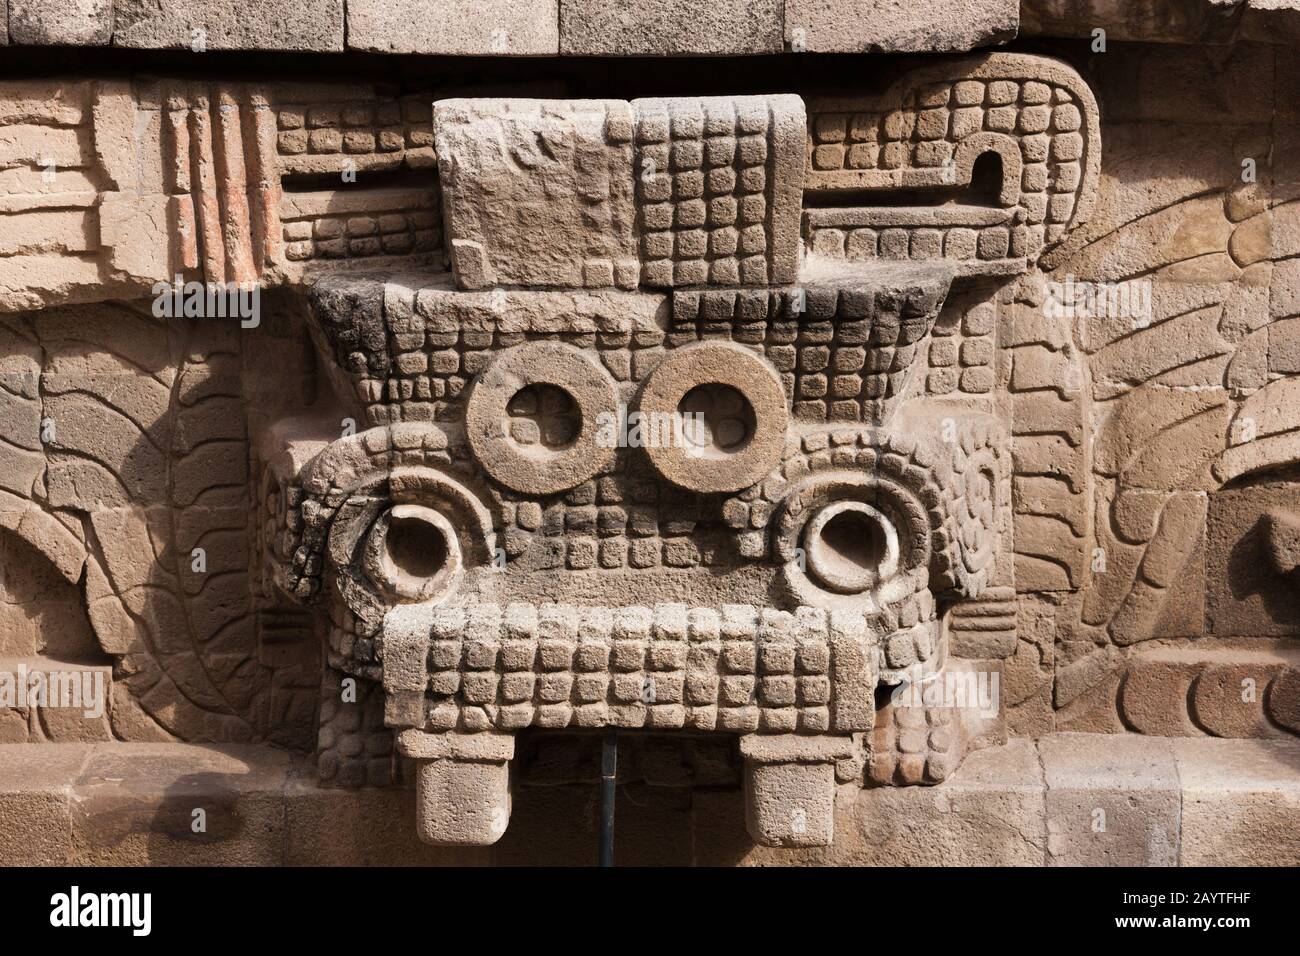 Tlaloc head of The temple of Quetzalcoatl, Teotihuacan, suburb of Mexico City, Mexico, Central America Stock Photo